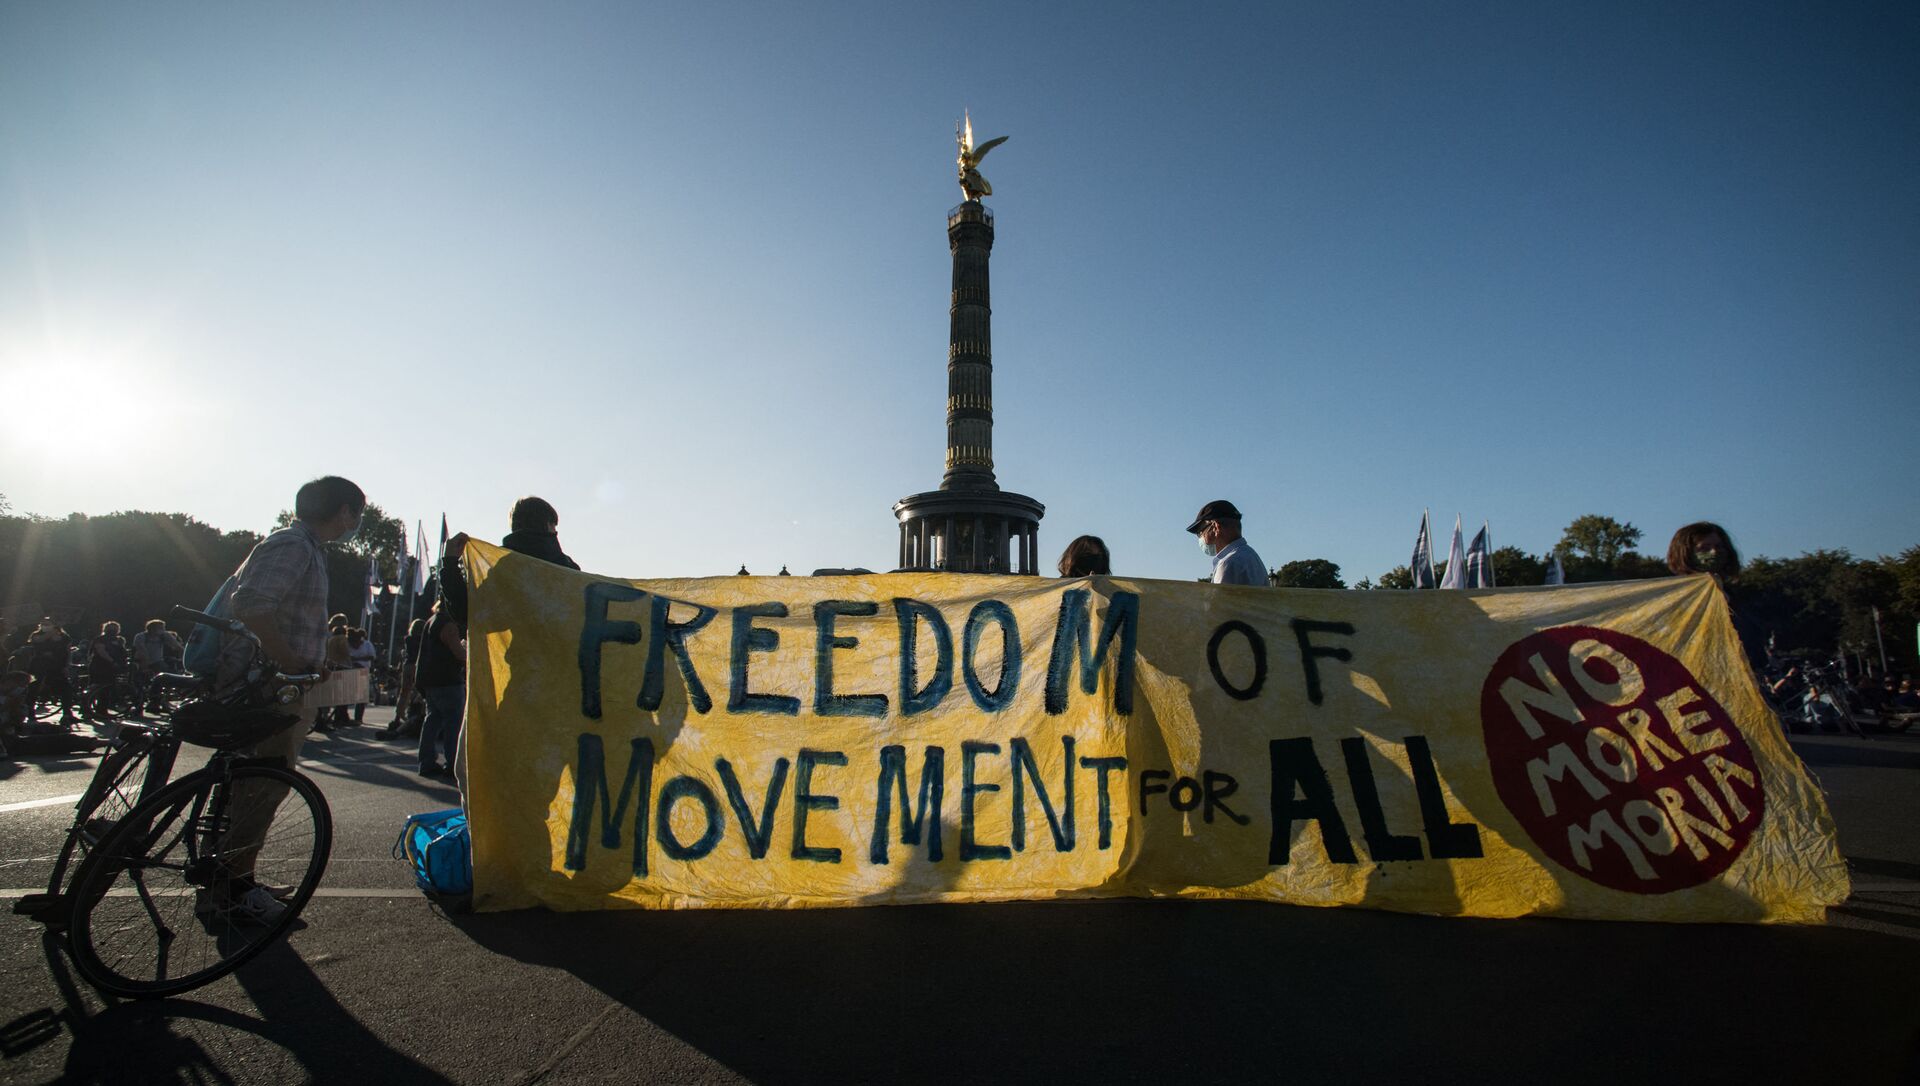 Protesters hold a banner reading Freedom of Movement for all during a demonstration for the evacuation of all migrant camps in Greece after the fire at the Moria refugee camp on Lesbos, on September 20, 2020 in Berlin. - Sputnik International, 1920, 15.02.2021